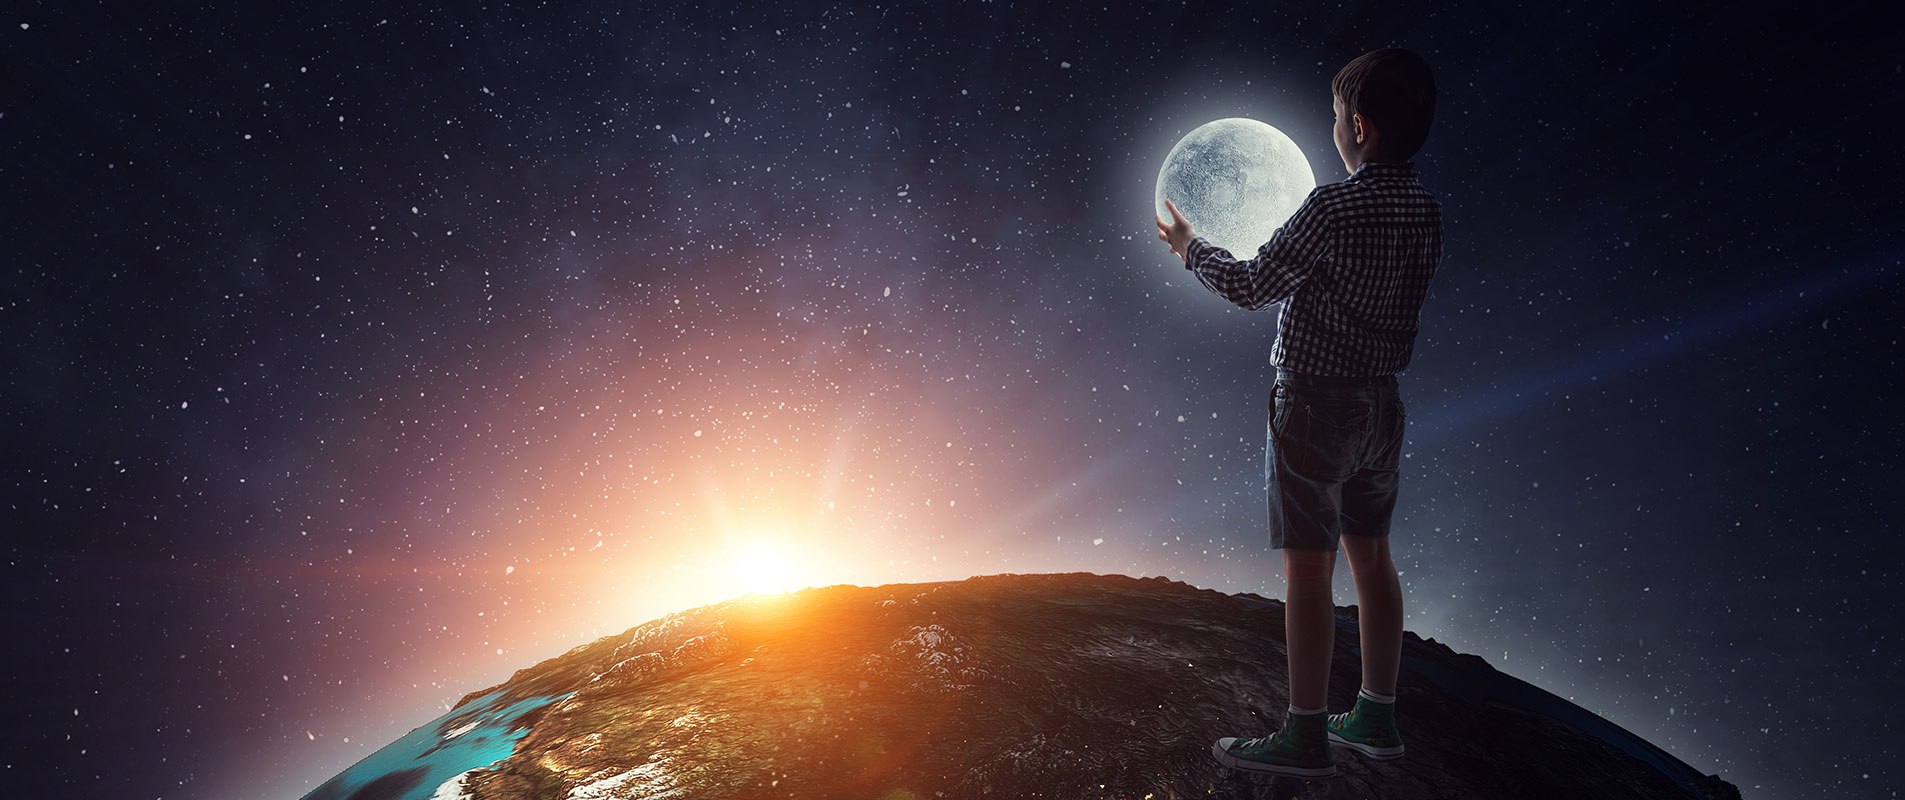 Concept image of boy standing on earth, holding moon